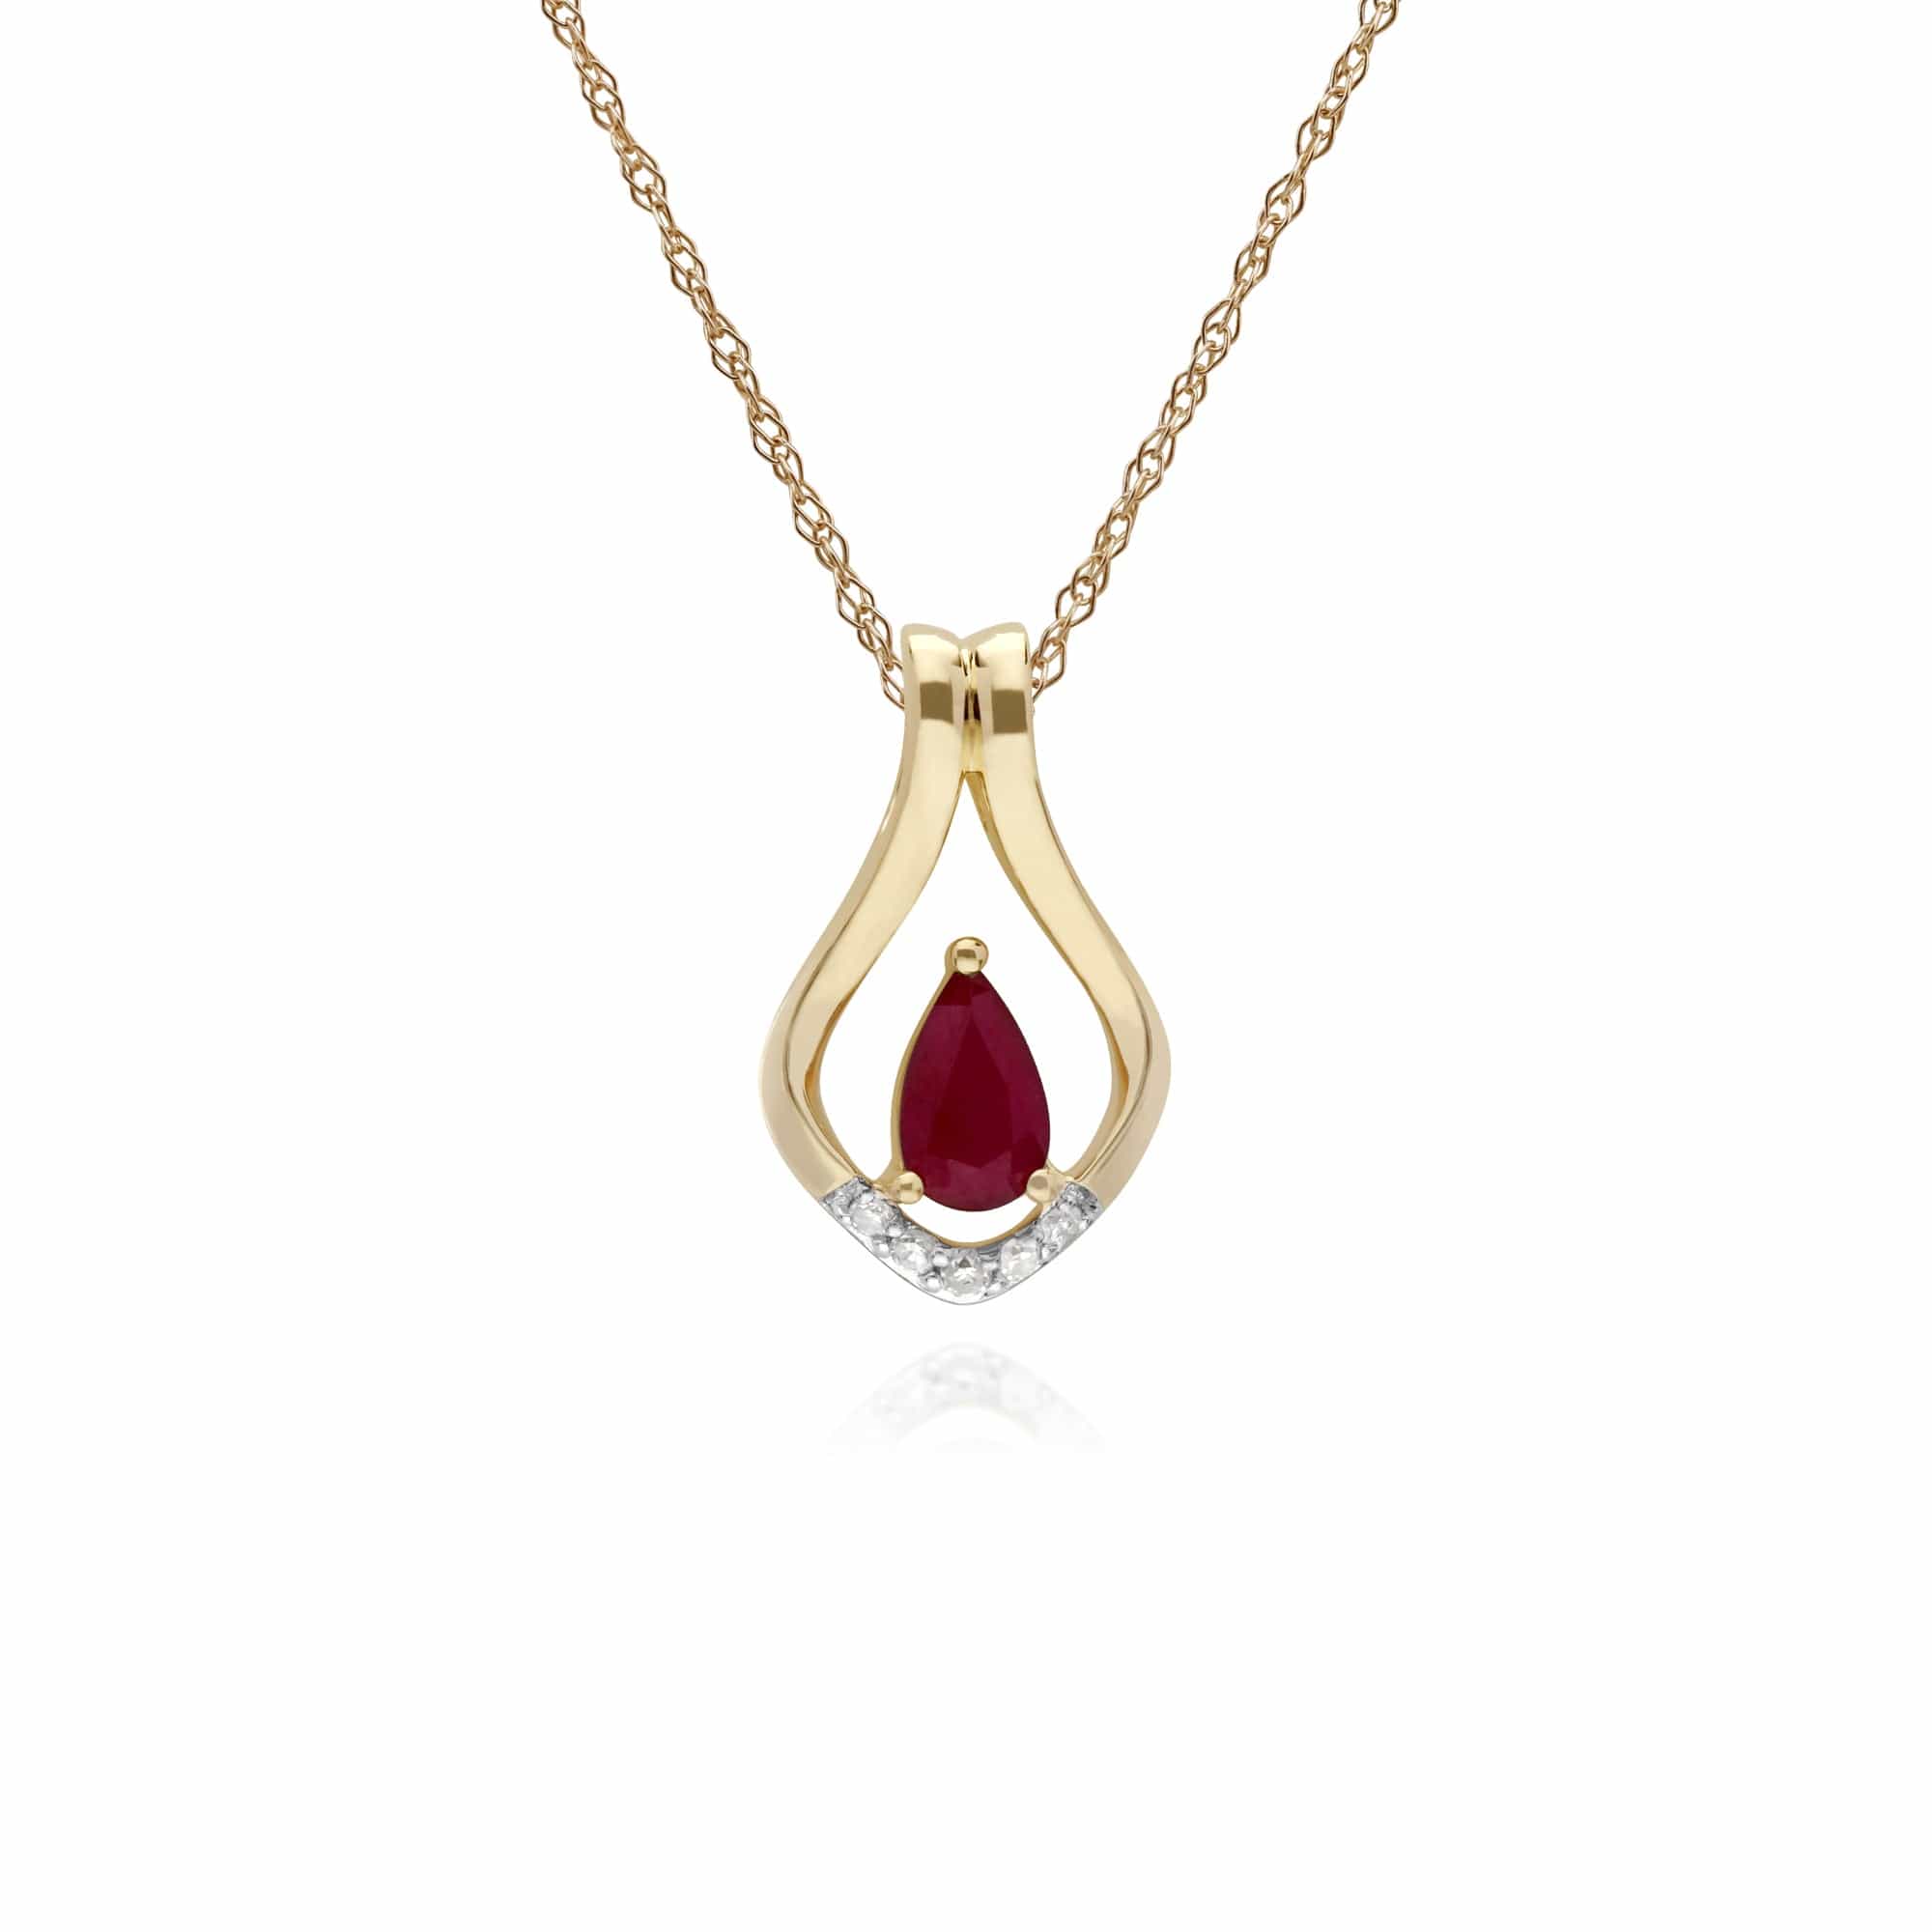 135E1578019-135P1916019 Classic Oval Ruby & Diamond Leaf Lever back Earrings & Pendant Set in 9ct Yellow Gold 3